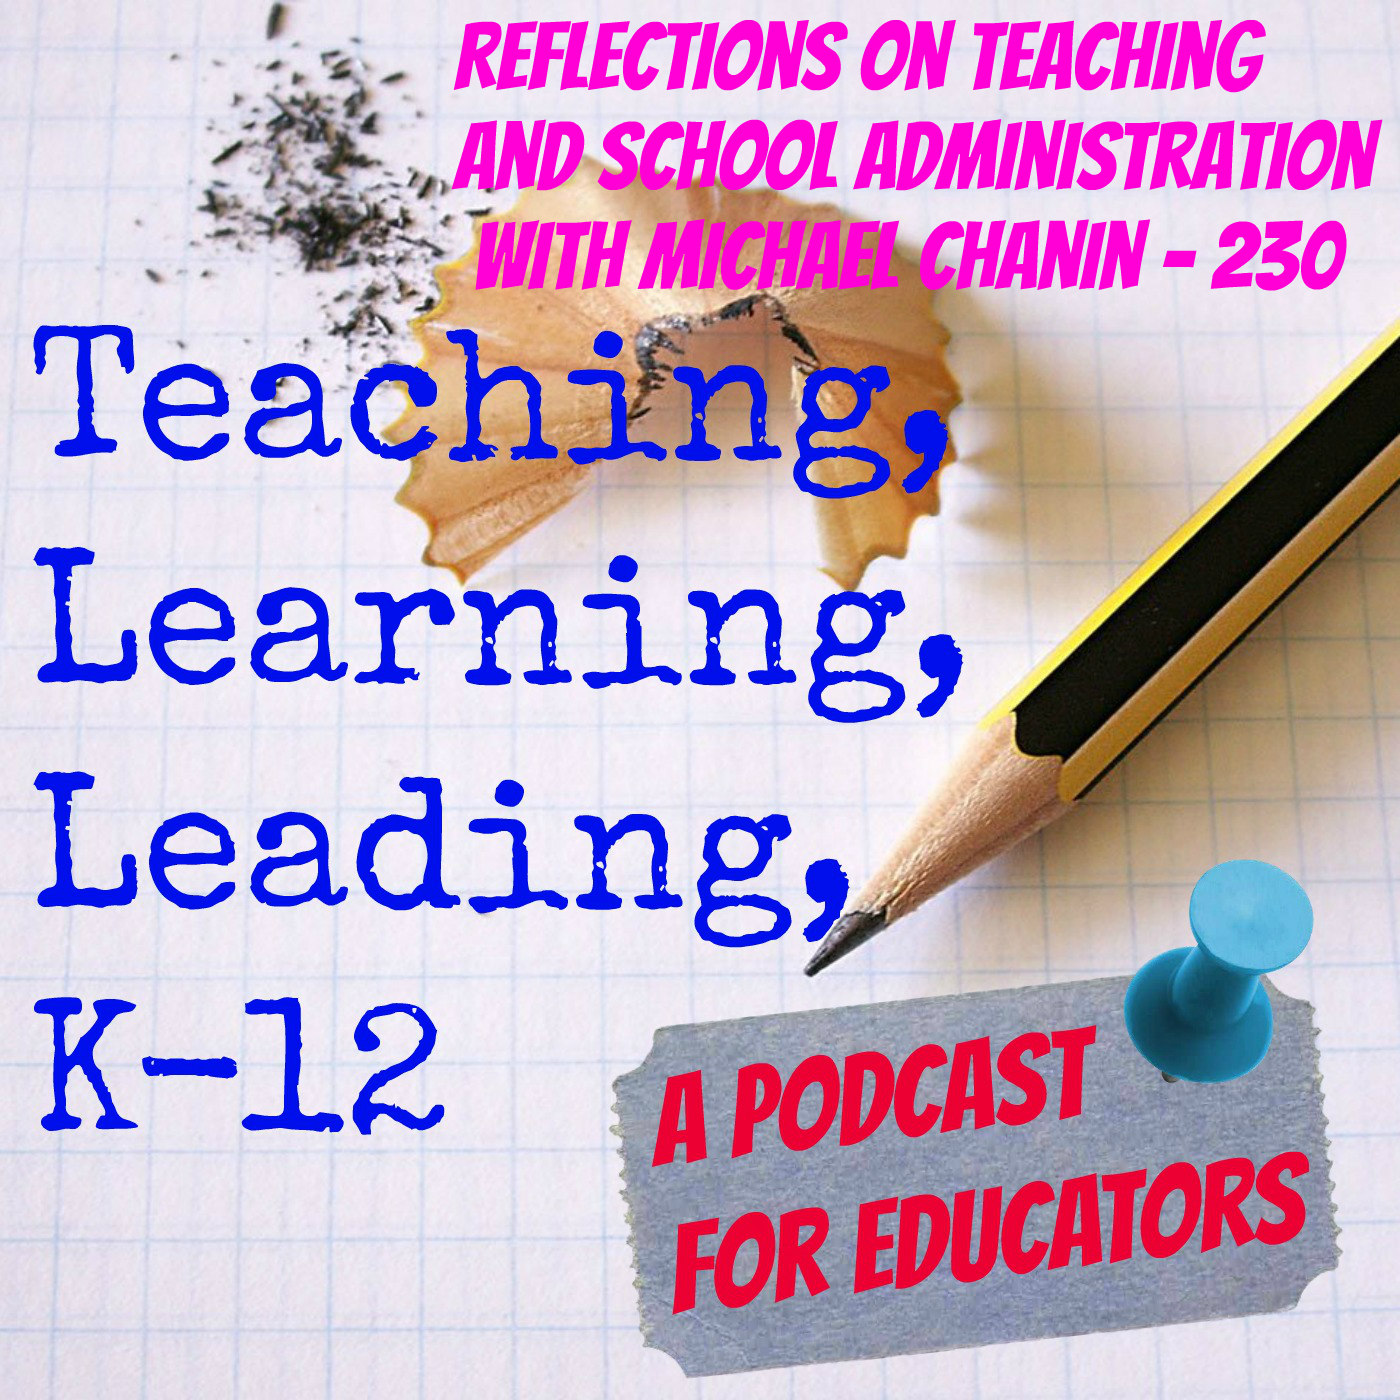 Reflections on Teaching and School Administration with Michael Chanin - 230